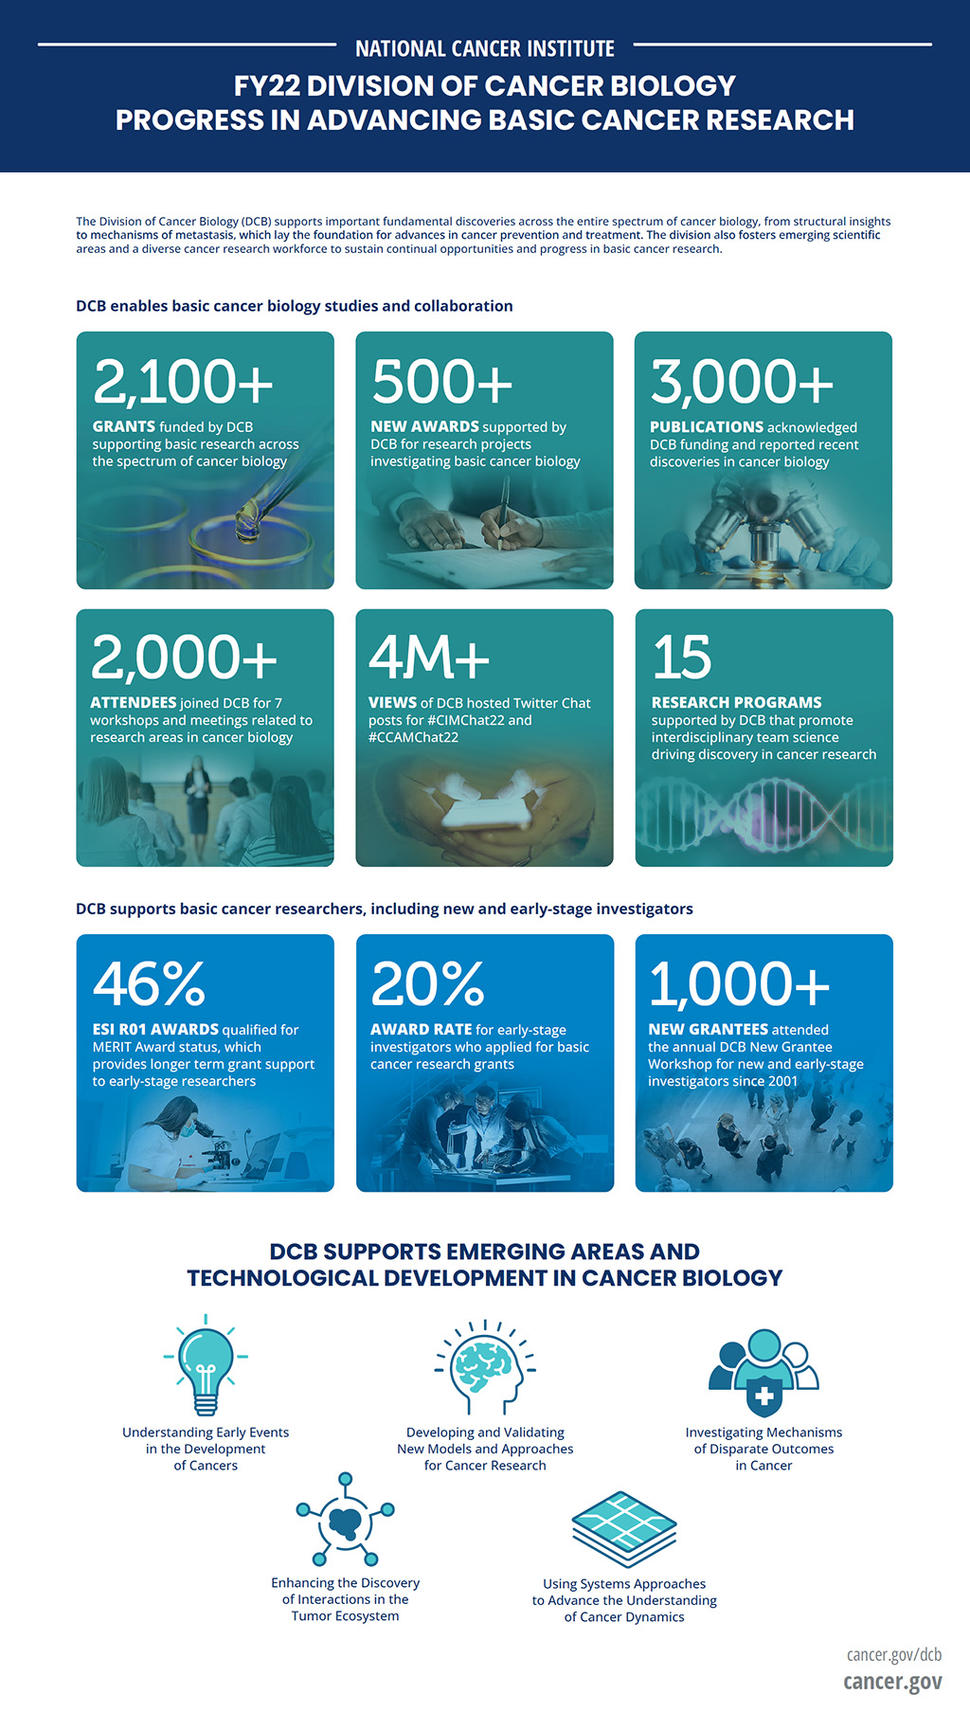 The FY22 Division of Cancer Biology (DCB) Progress in Advancing Basic Cancer Research infographic shows that DCB enables basic cancer biology studies and collaboration and supports basic cancer researchers, including new and early-stage investigators (ESIs). It also includes icons showing that DCB supports emerging areas and technological development in cancer biology.